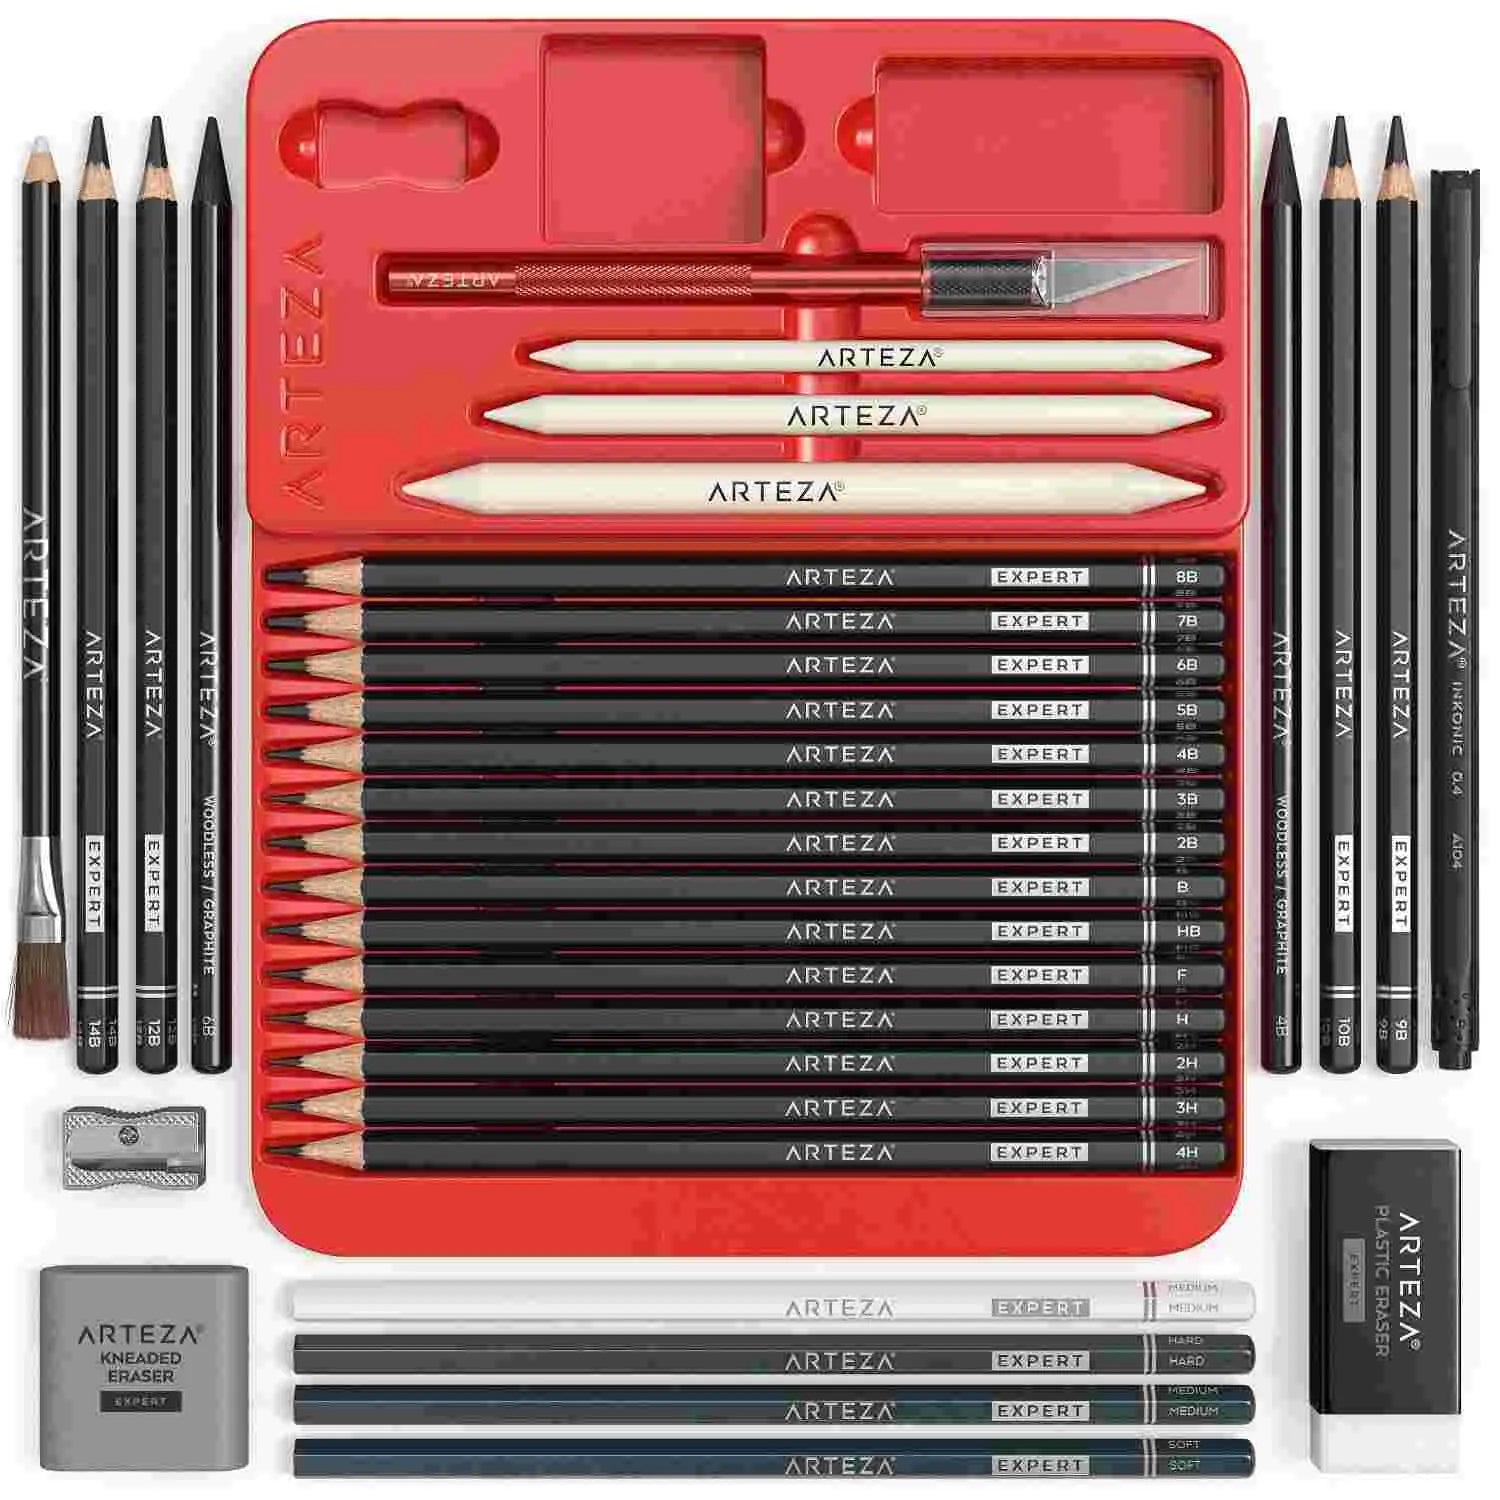 Arteza Drawing Set for Adults, Set of 33 Artist Sketching Tools, 20 Graphite & 4 Charcoal Sketch Pencils, 1 Fineliner, 3 Blenders, 1 Sharpener, 3 Erasers & 1 Hobby Knife, Art Supplies for Drawing Arteza